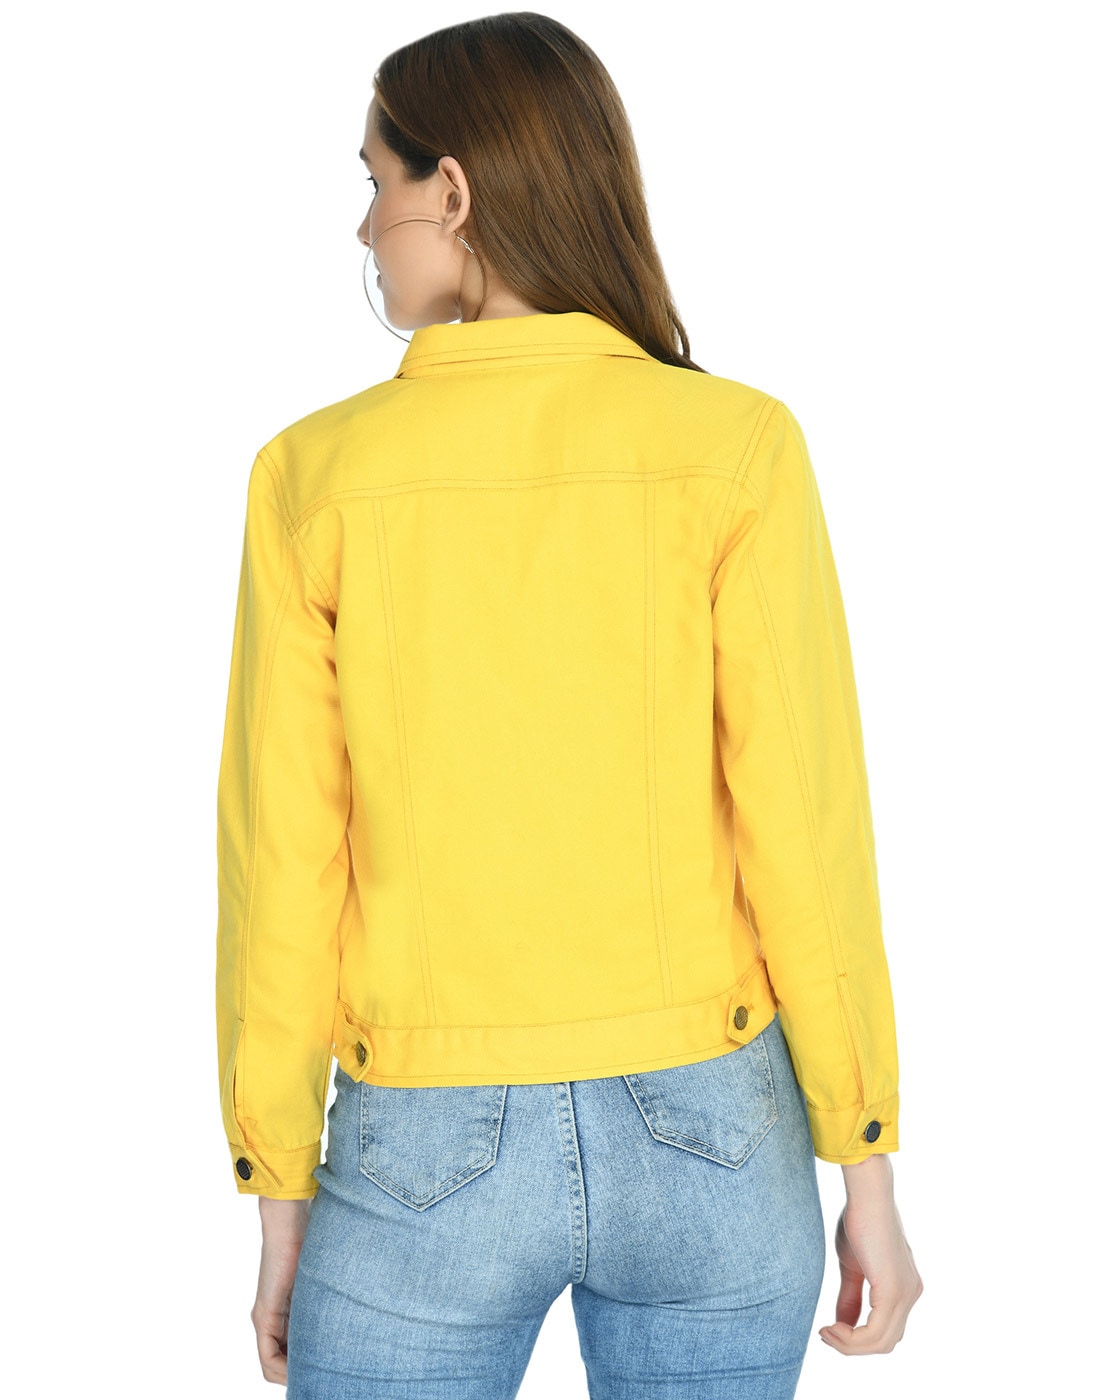 Korean Loose Cheap Denim Jackets Womens For Women Autumn Short Sleeve  Casual Coat In Red, Yellow, And White T200319 From Xue04, $23.67 |  DHgate.Com